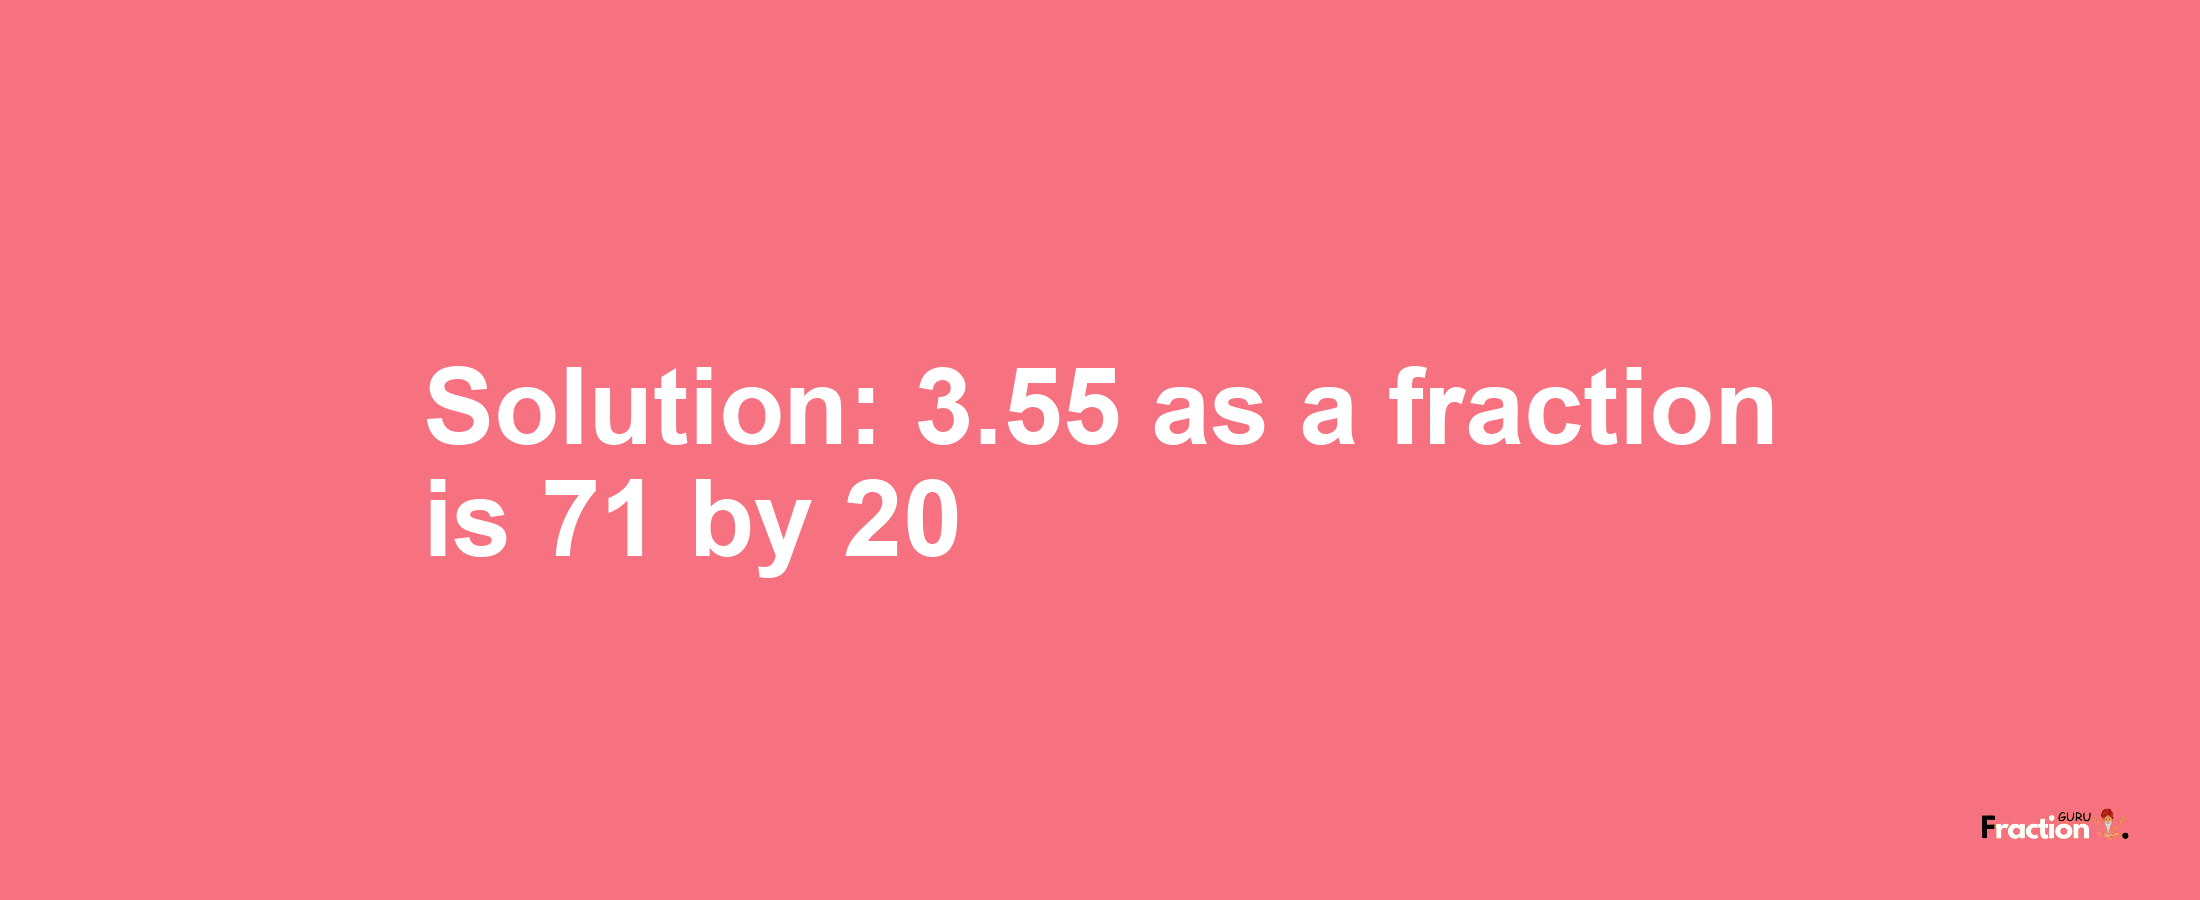 Solution:3.55 as a fraction is 71/20